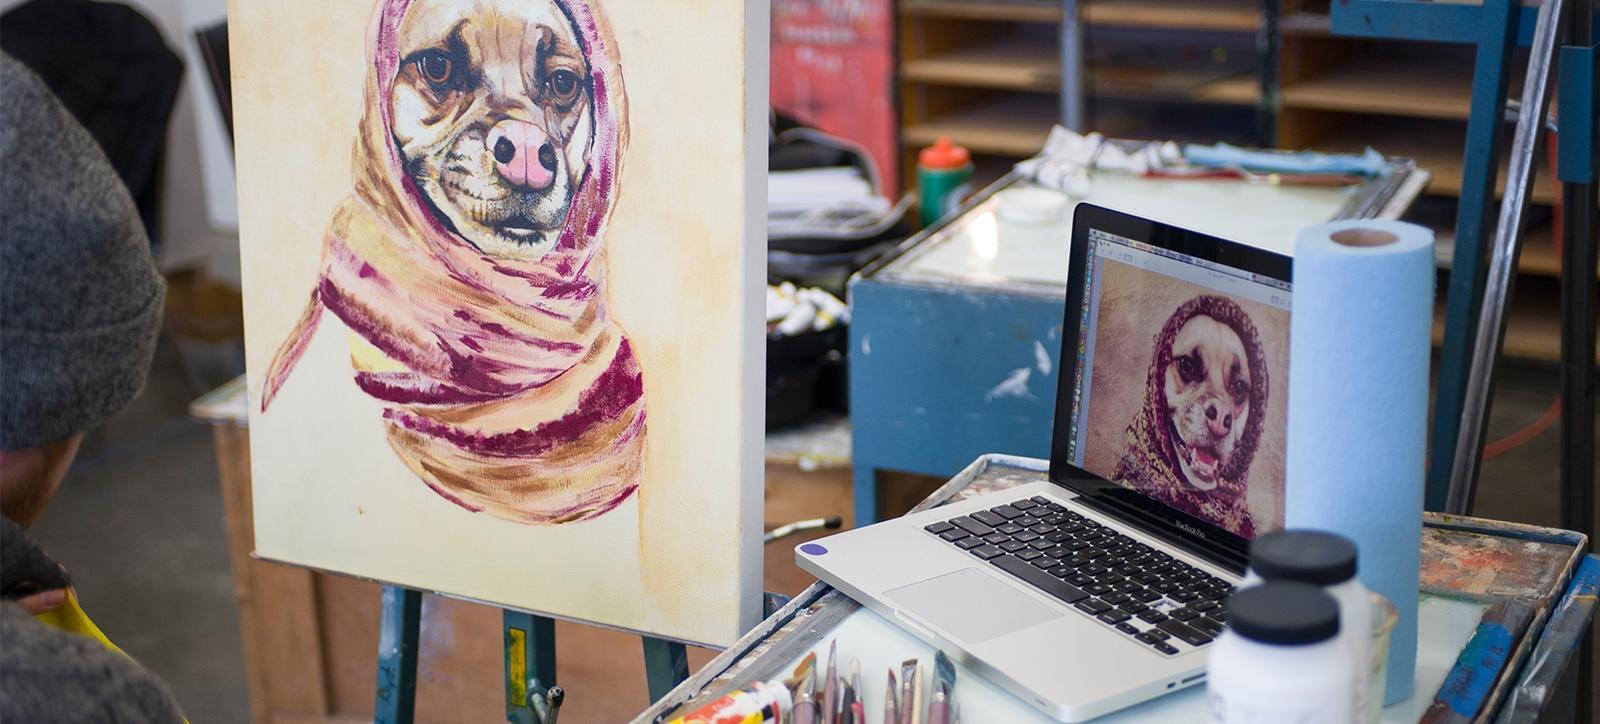 Student Painting pic of dog from computer